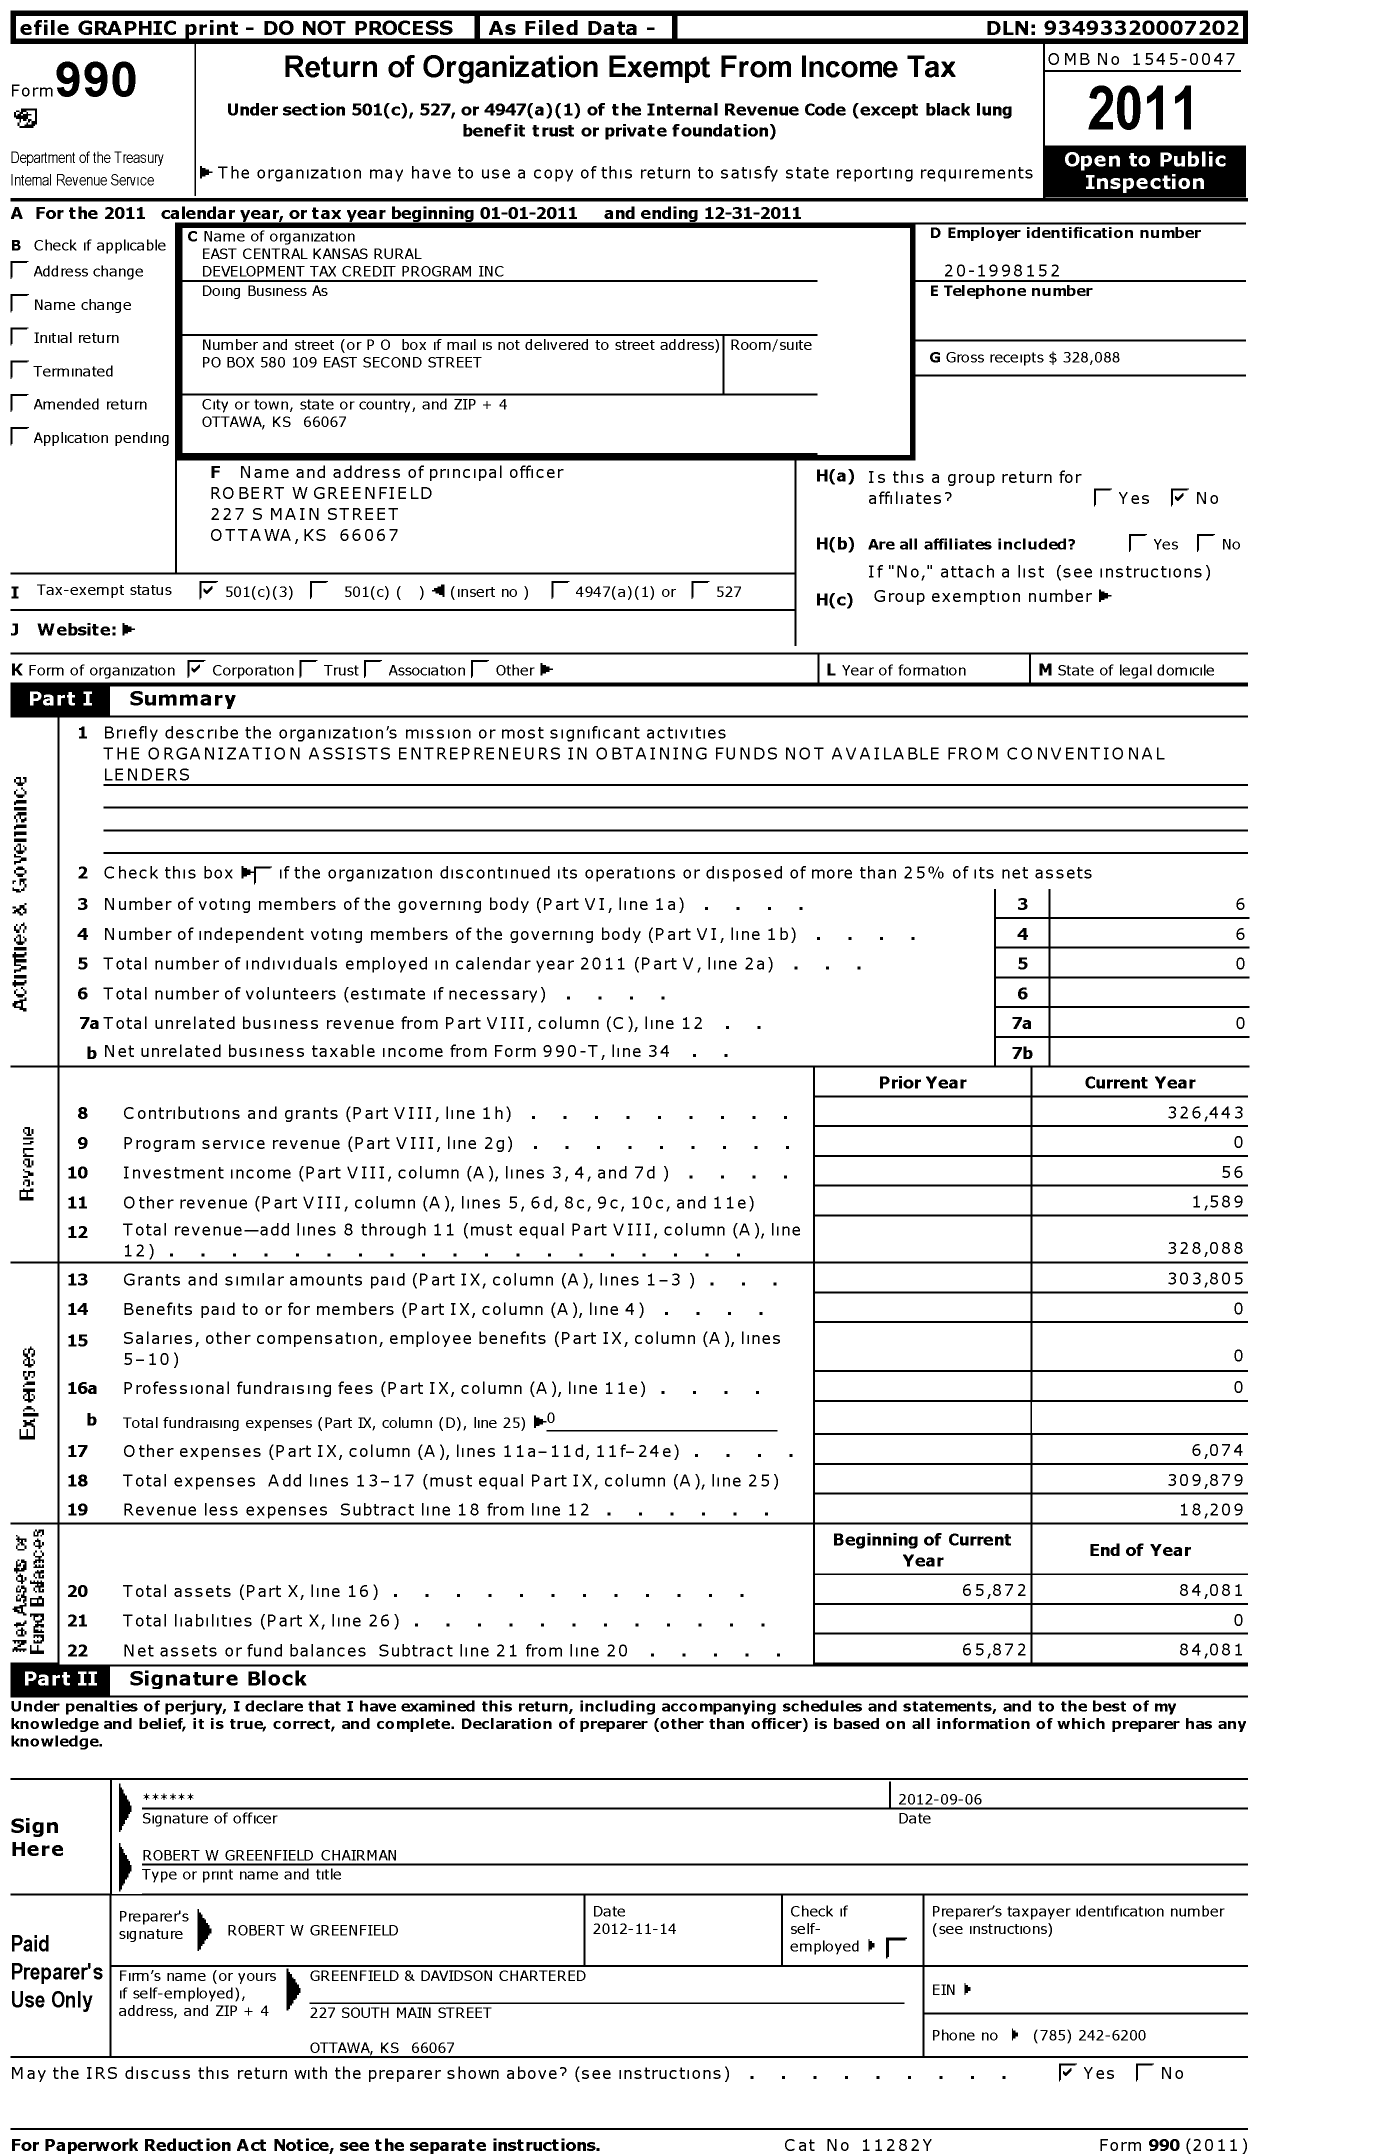 Image of first page of 2011 Form 990 for East Central Kansas Rural Development Tax Credit Program